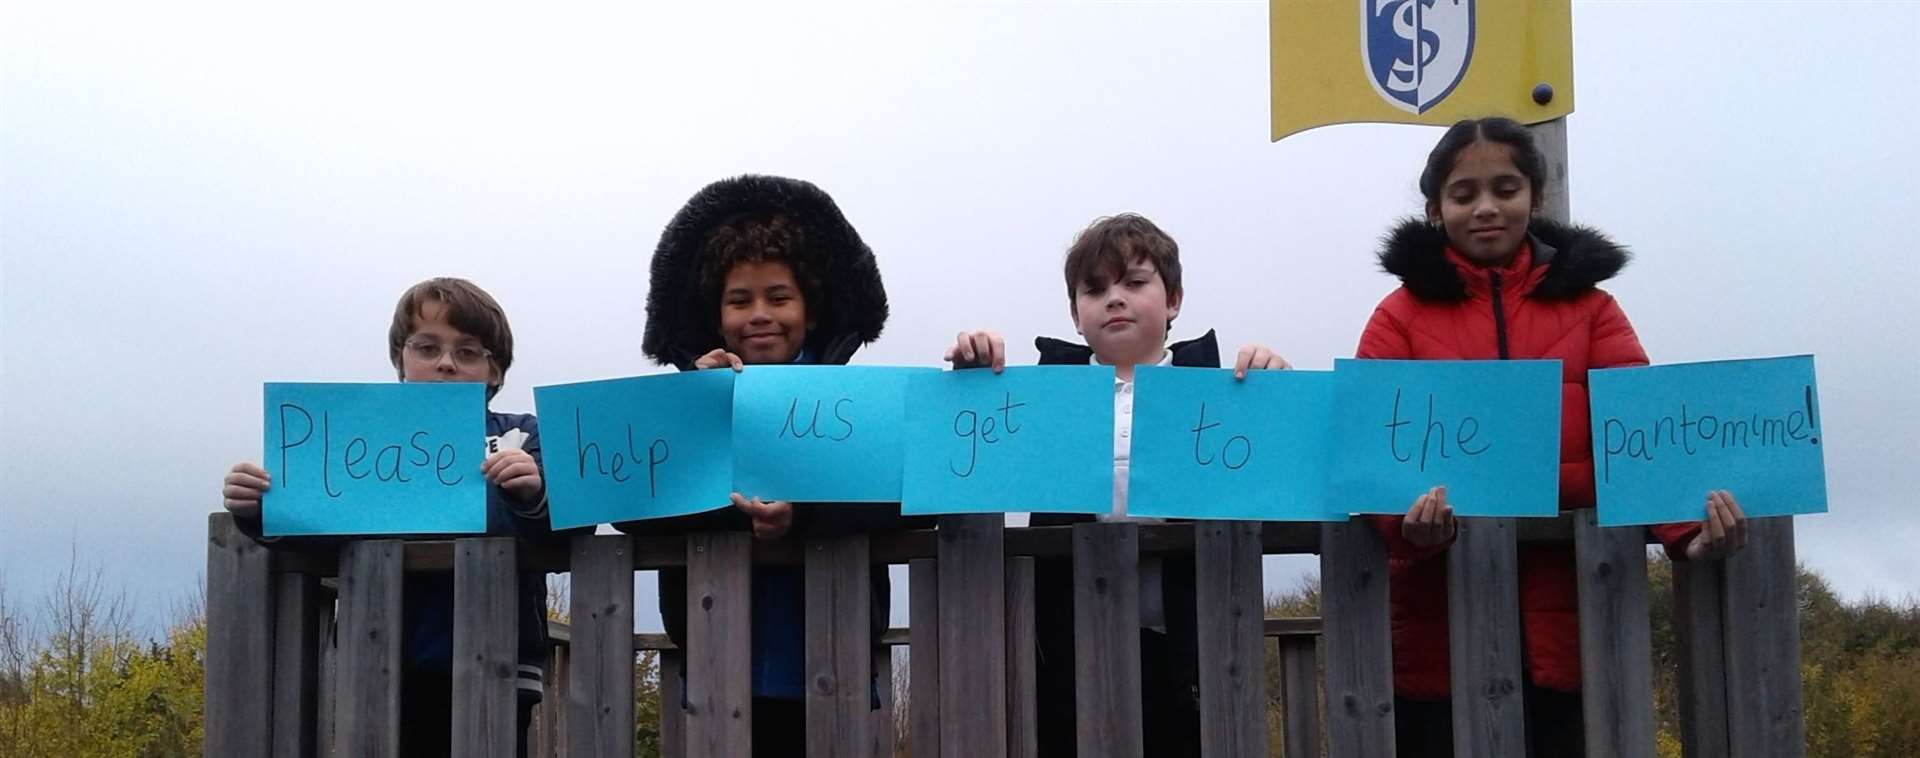 Pupils worried their school-trip to see the pantomime at Marlowe Theatre in Canterbury might be cancelled due to train strikes, but an online campaign by teachers saved the day. Photo: St Joseph's Catholic Primary